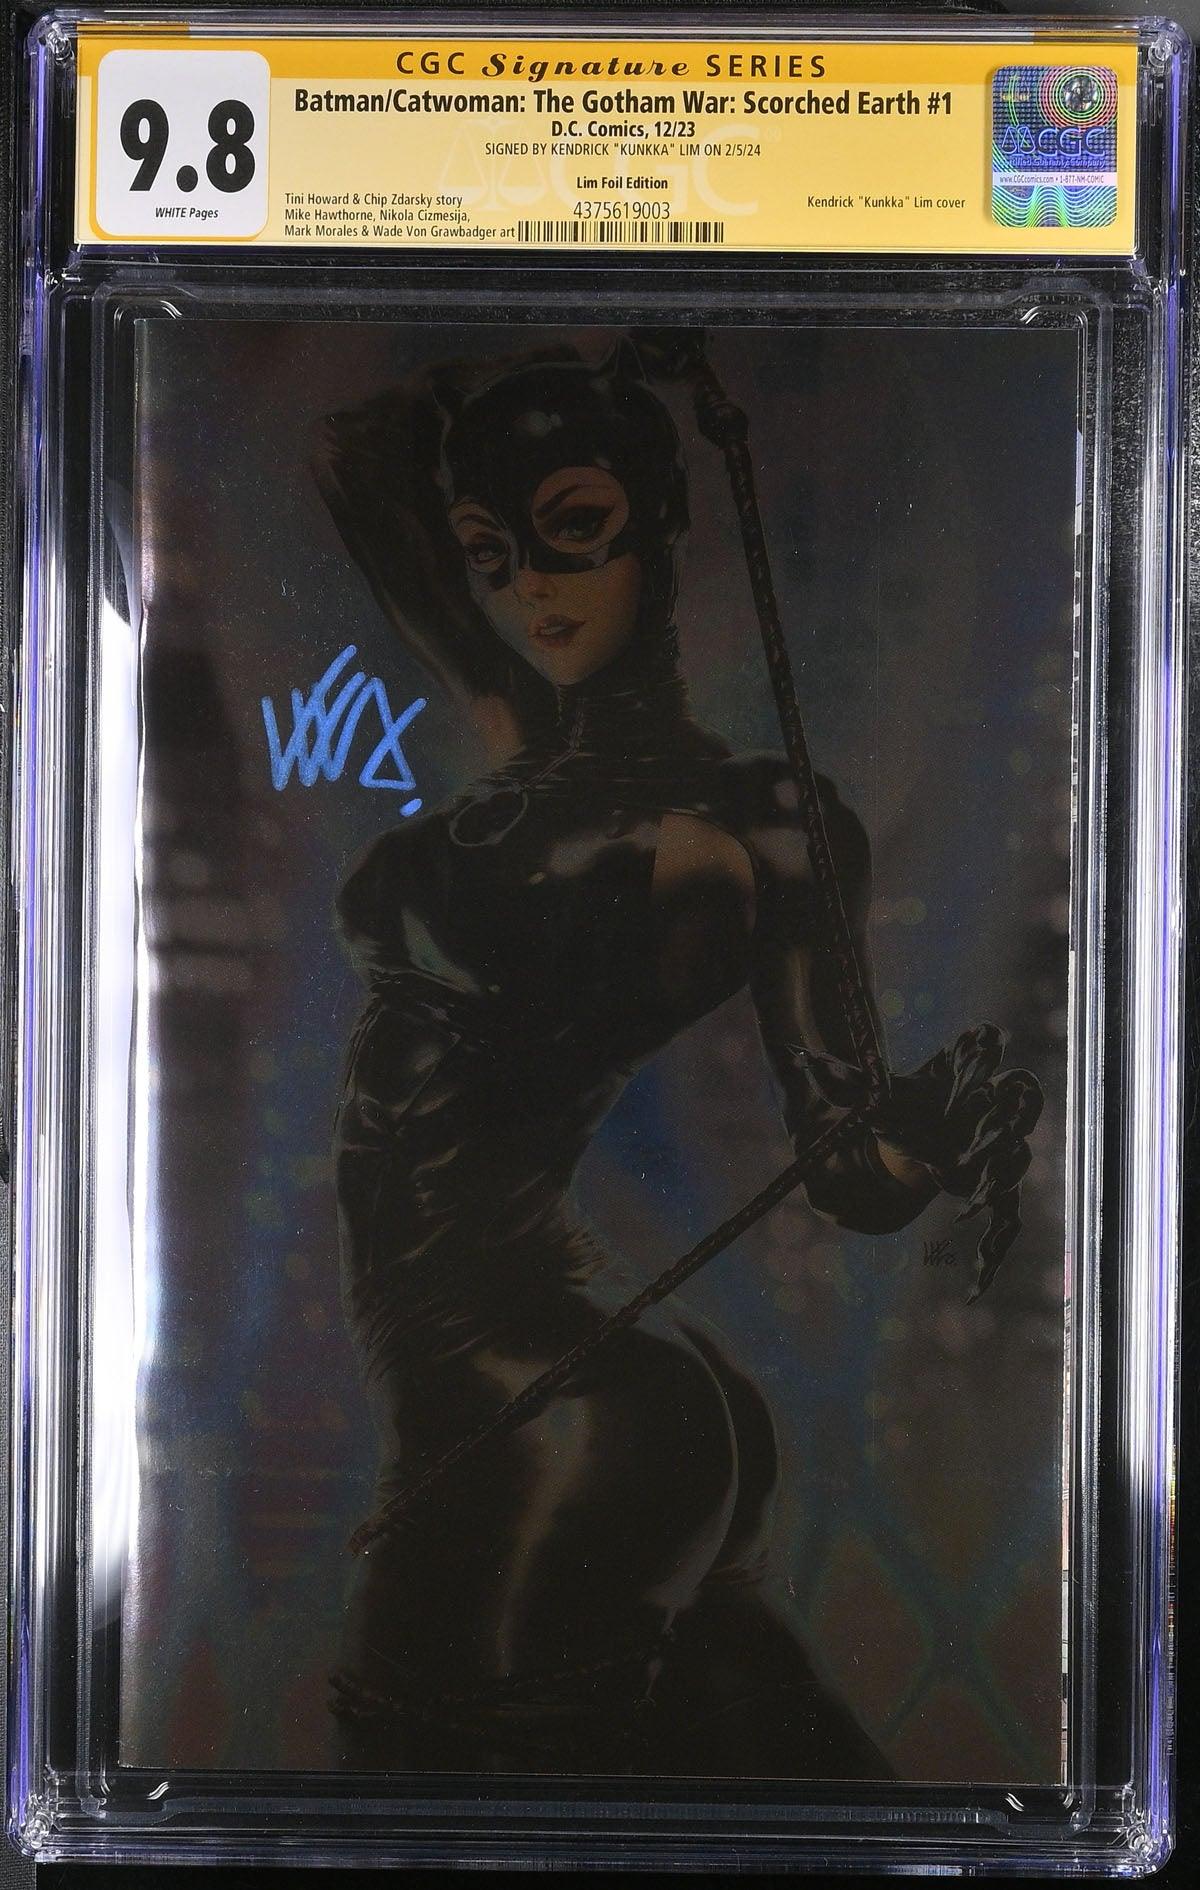 CGC BATMAN CATWOMAN THE GOTHAM WAR SCORCHED EARTH #1 LIM FOIL EDITION (9.8) SIGNATURE SERIES - SIGNED BY KENDRICK "KUNKKA" LIM - Kings Comics